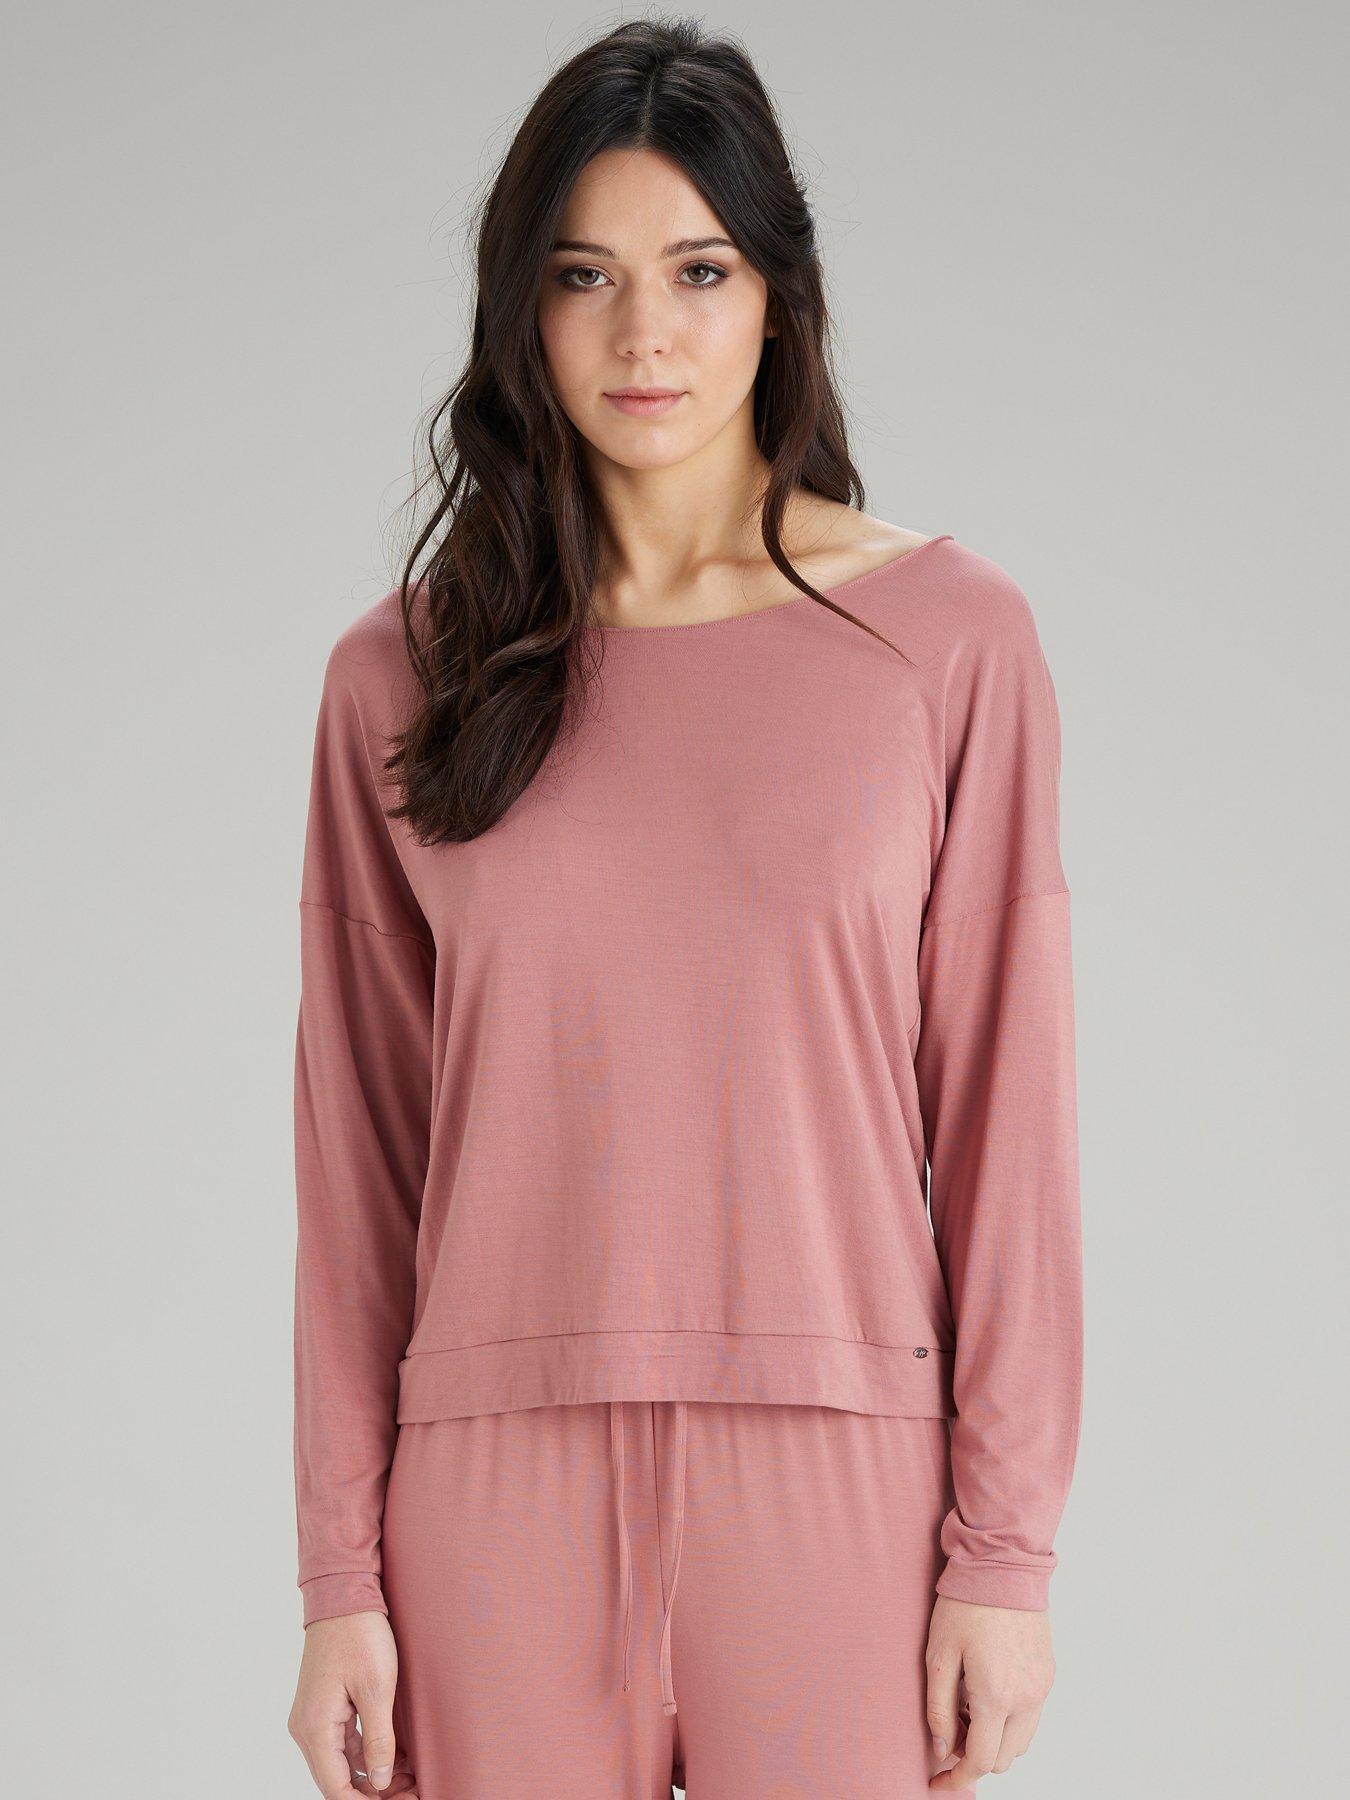  Botanical Lace Lounge Slouch Top - Dusty Rose